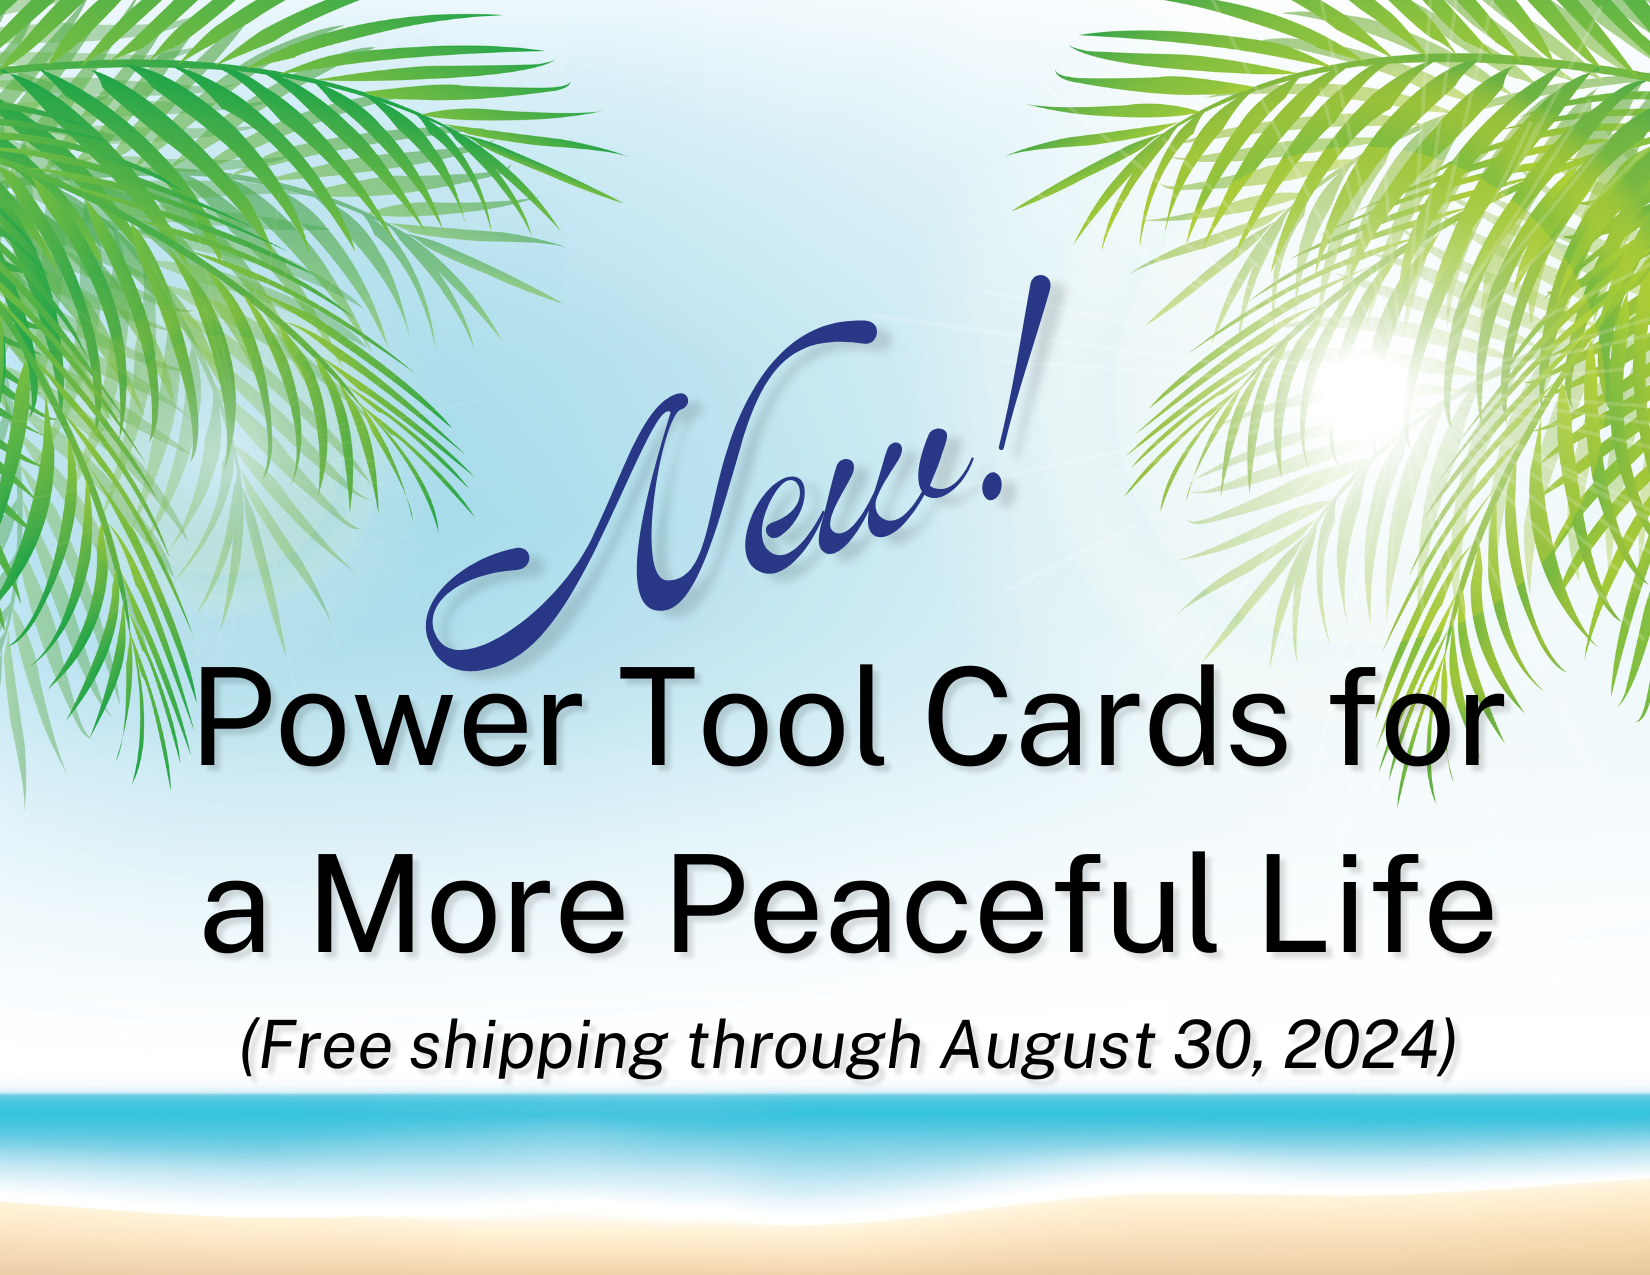 Announcement of Tool Cards